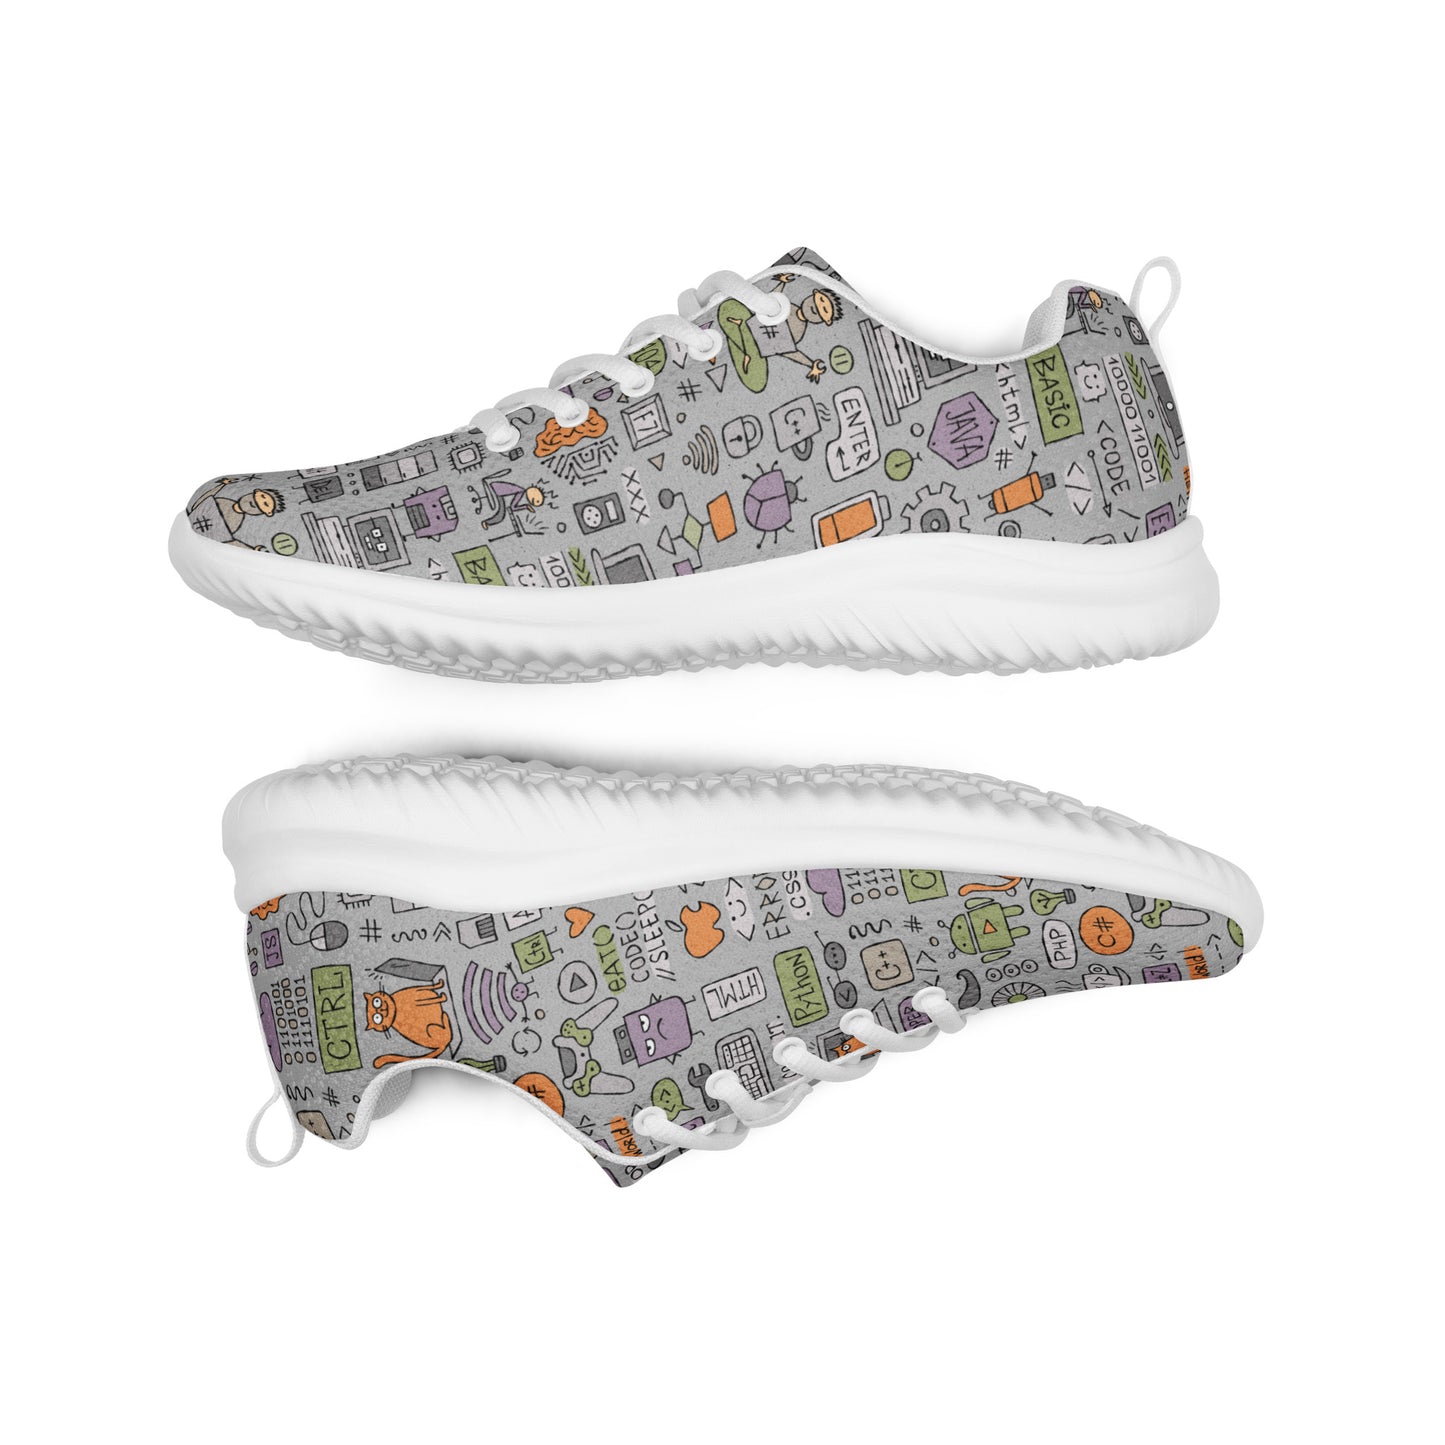 Men's Athletic Shoes with Funny IT Print kudrylab